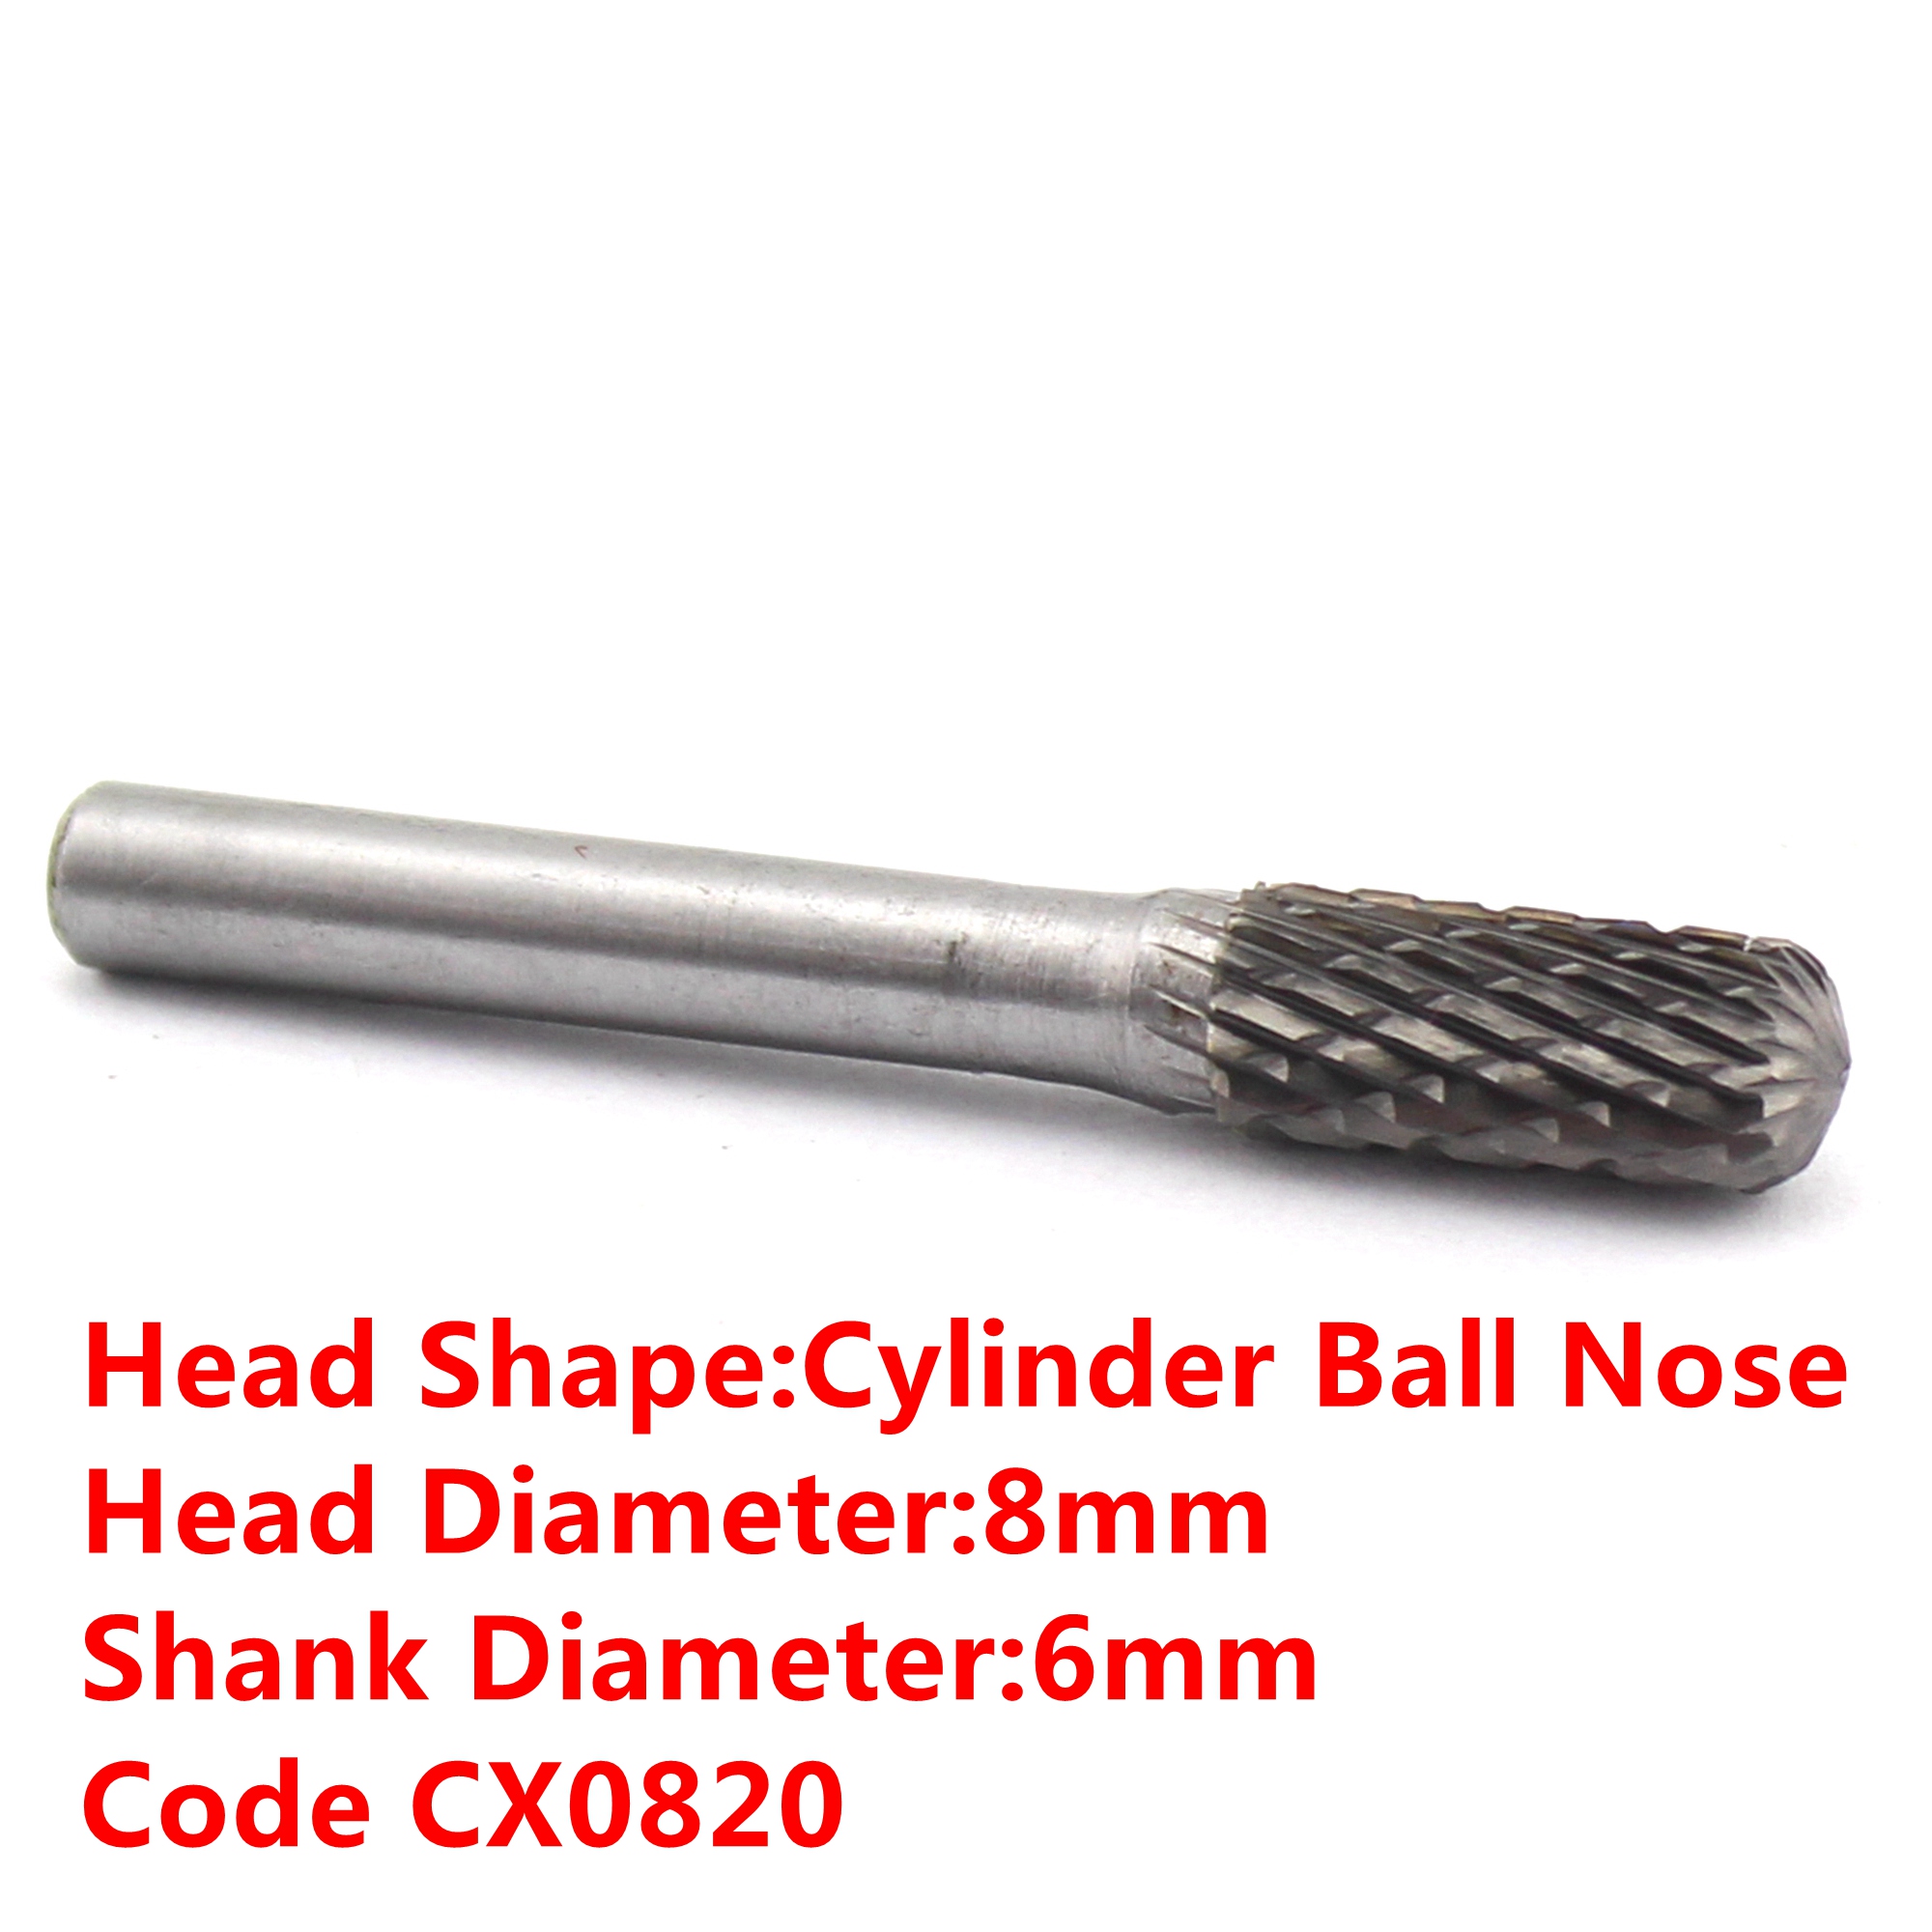 6mm Shank x 8 10 12 14 16 mm Head Shape CYLINDER BALL NOSE Tungsten Steel Solid Carbide Burrs Rotary Tool Drill Bit Dbl End Cut